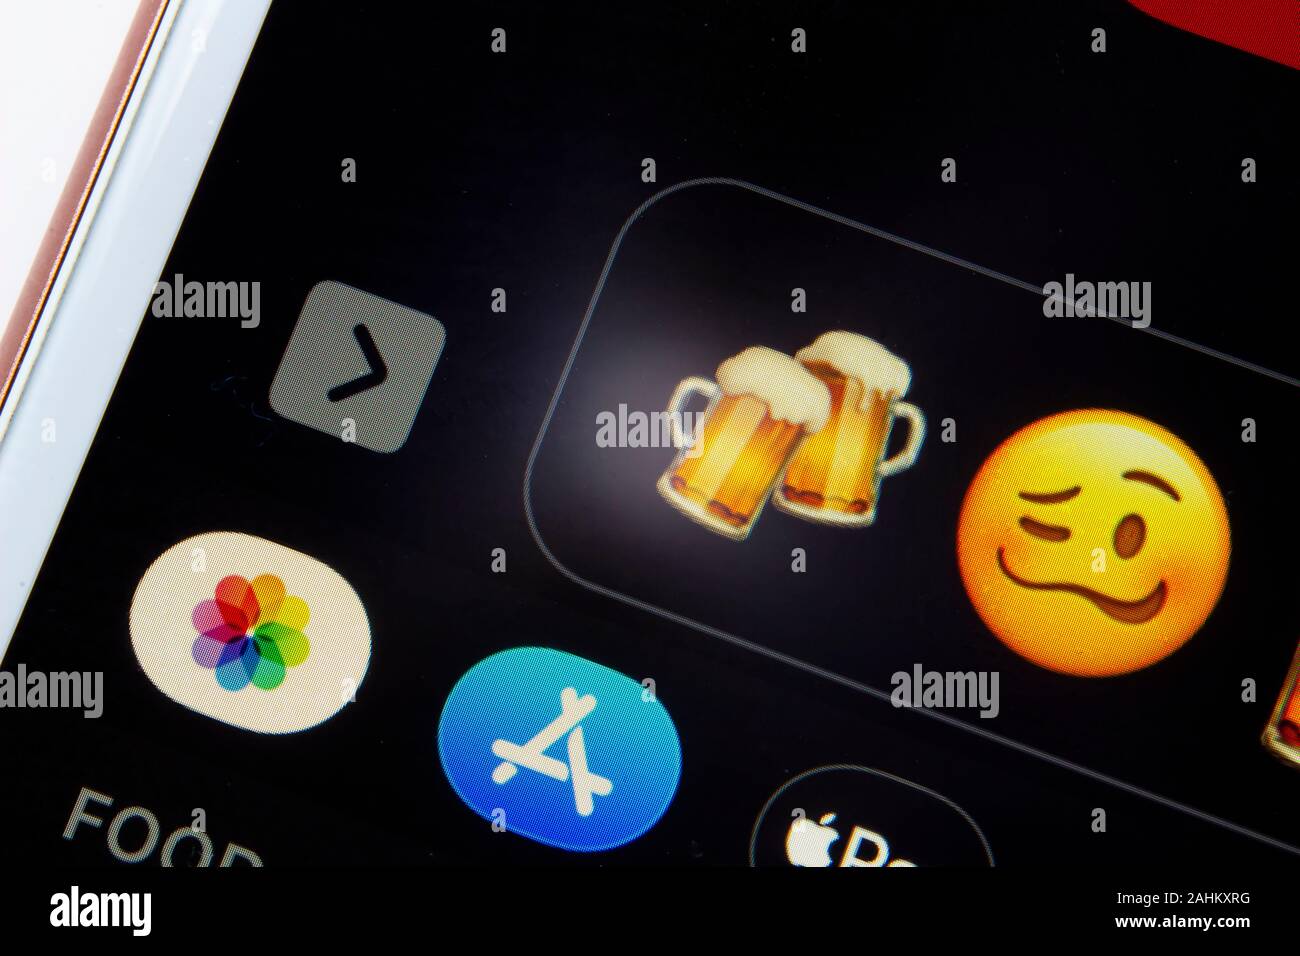 Drunk Texts concept, cheering beer glasses with a drunk emoji face. Facts Behind Drunk Dialing, Texting, and Socializing Online. Illustrative Stock Photo